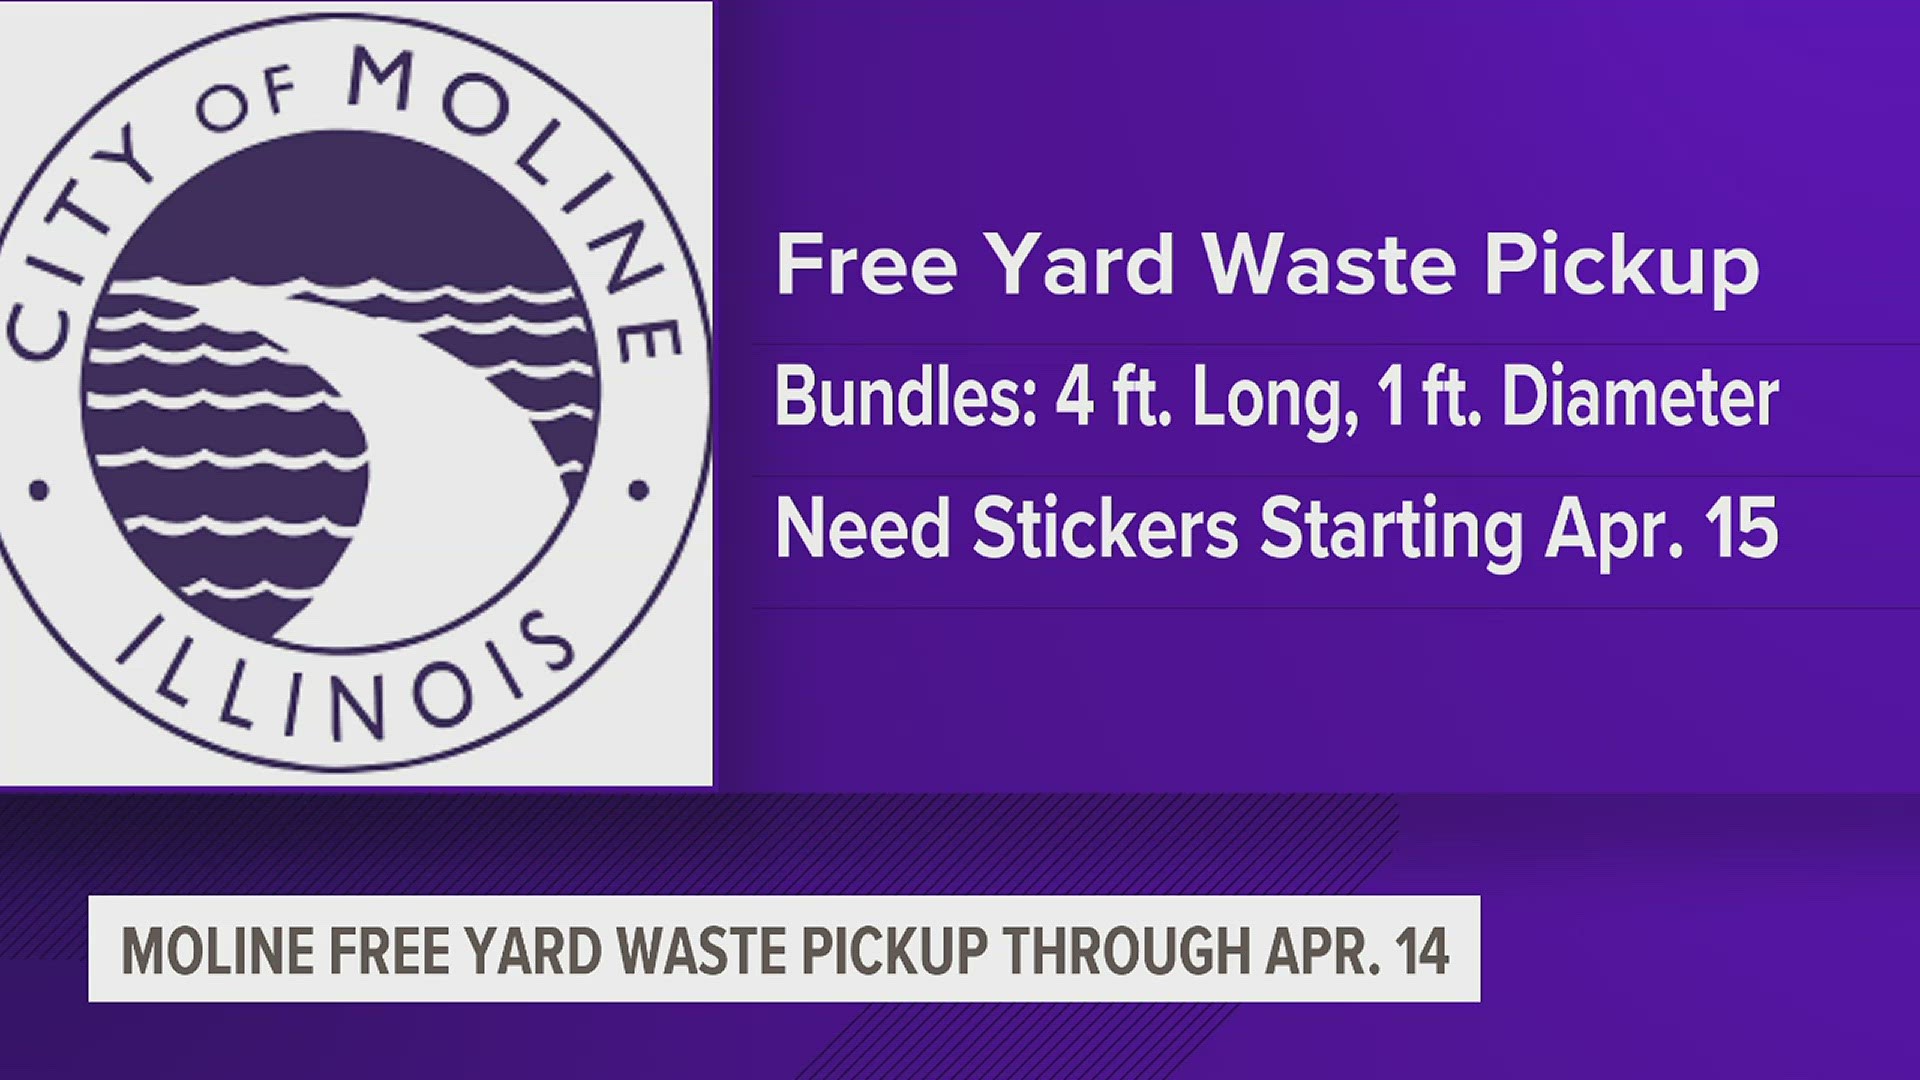 Residents will need to bundle up their items and have yard waste stickers for pickup after the 15th.